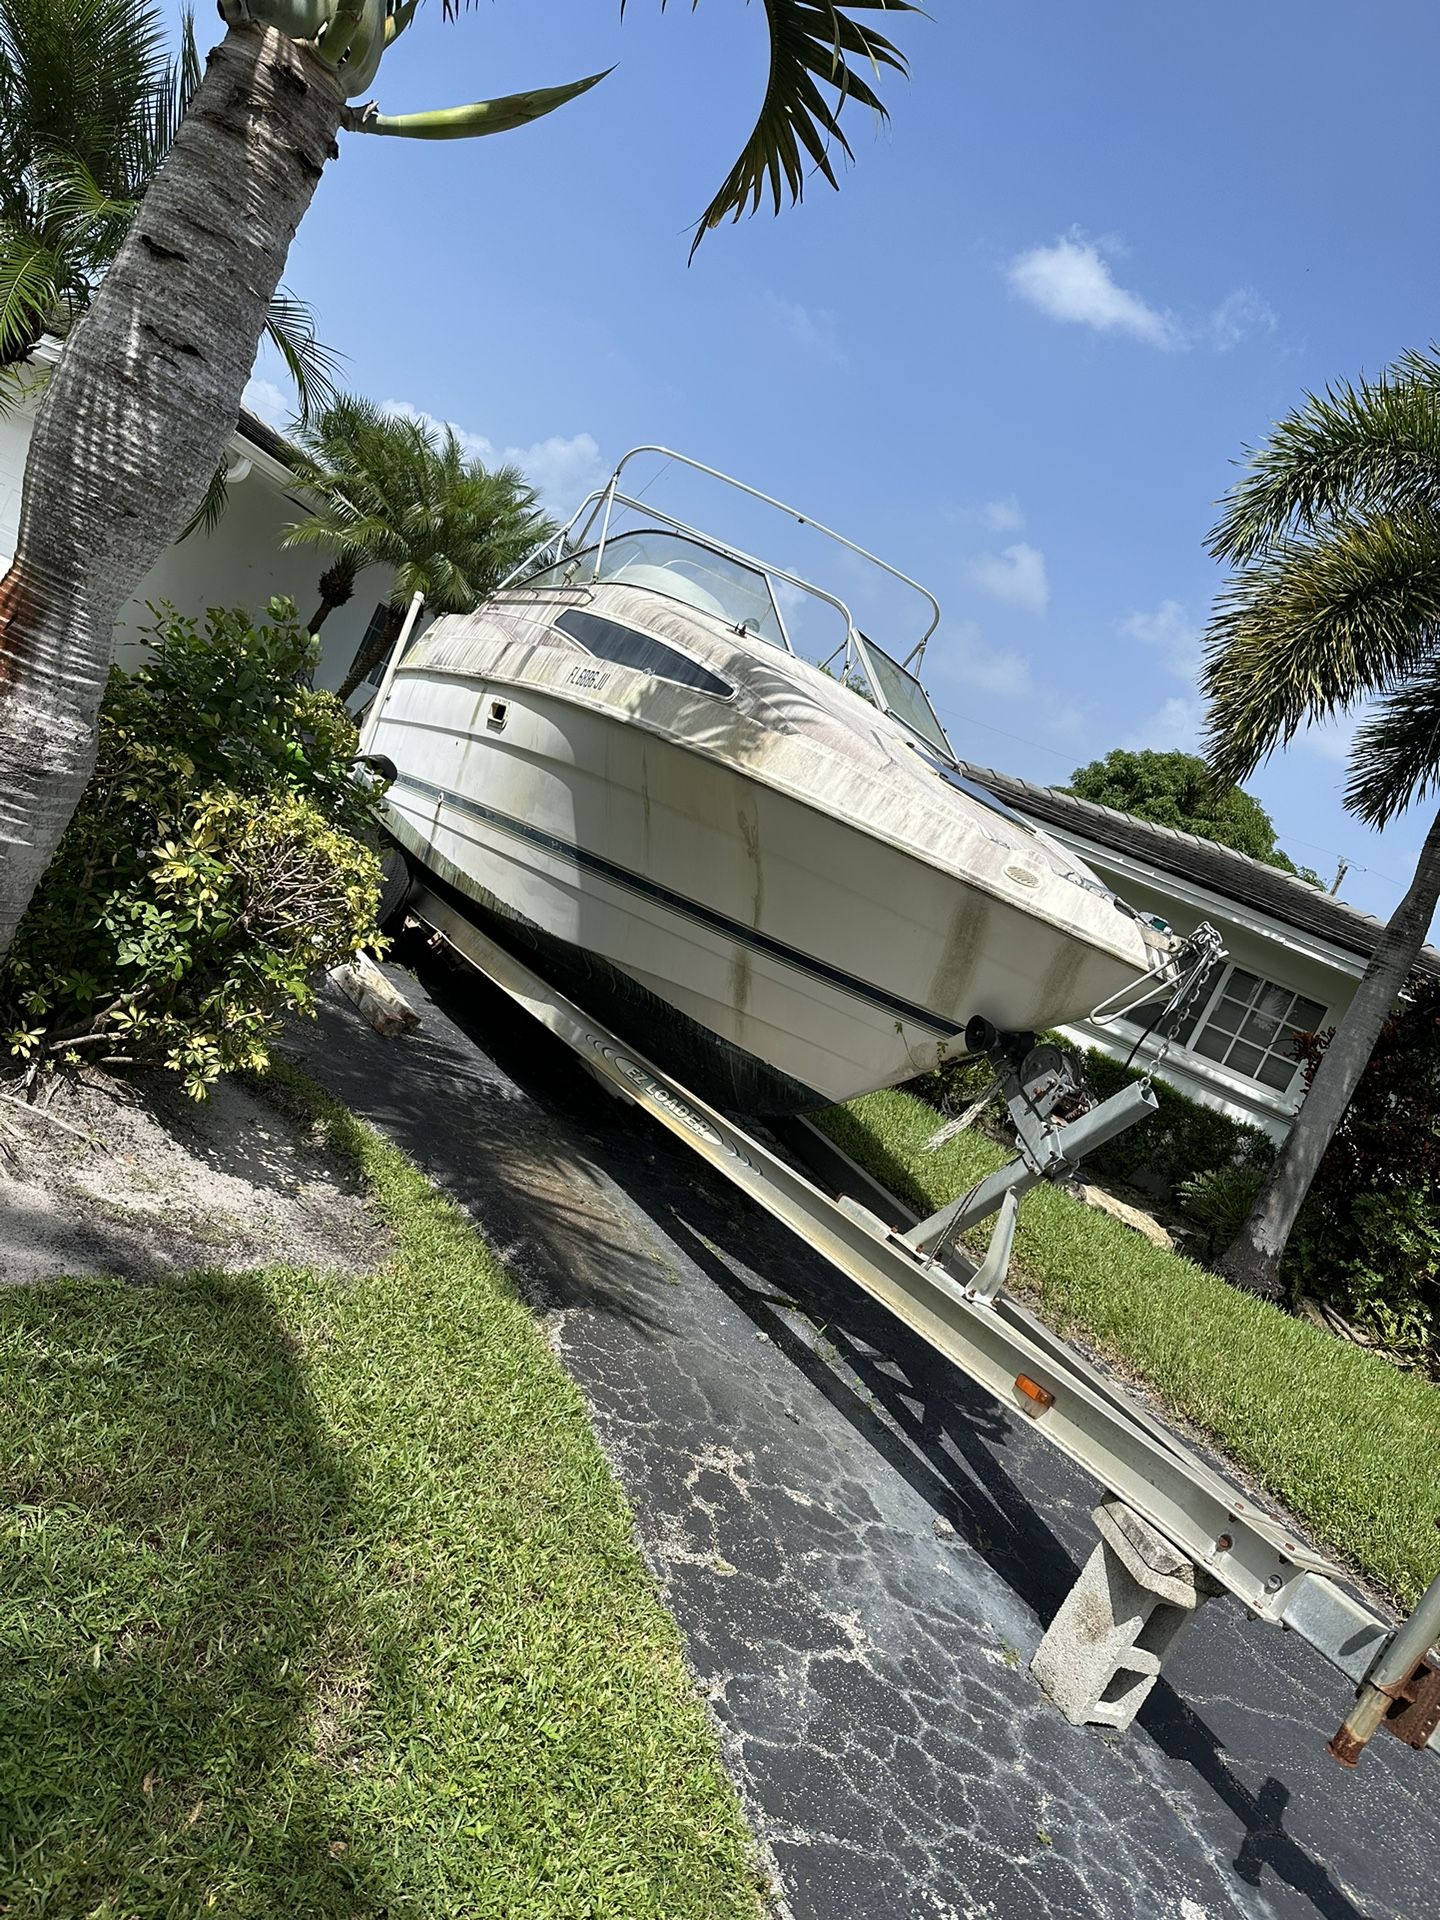 FREE BOAT BAYLINER Comes with 40 Ft Trailer 